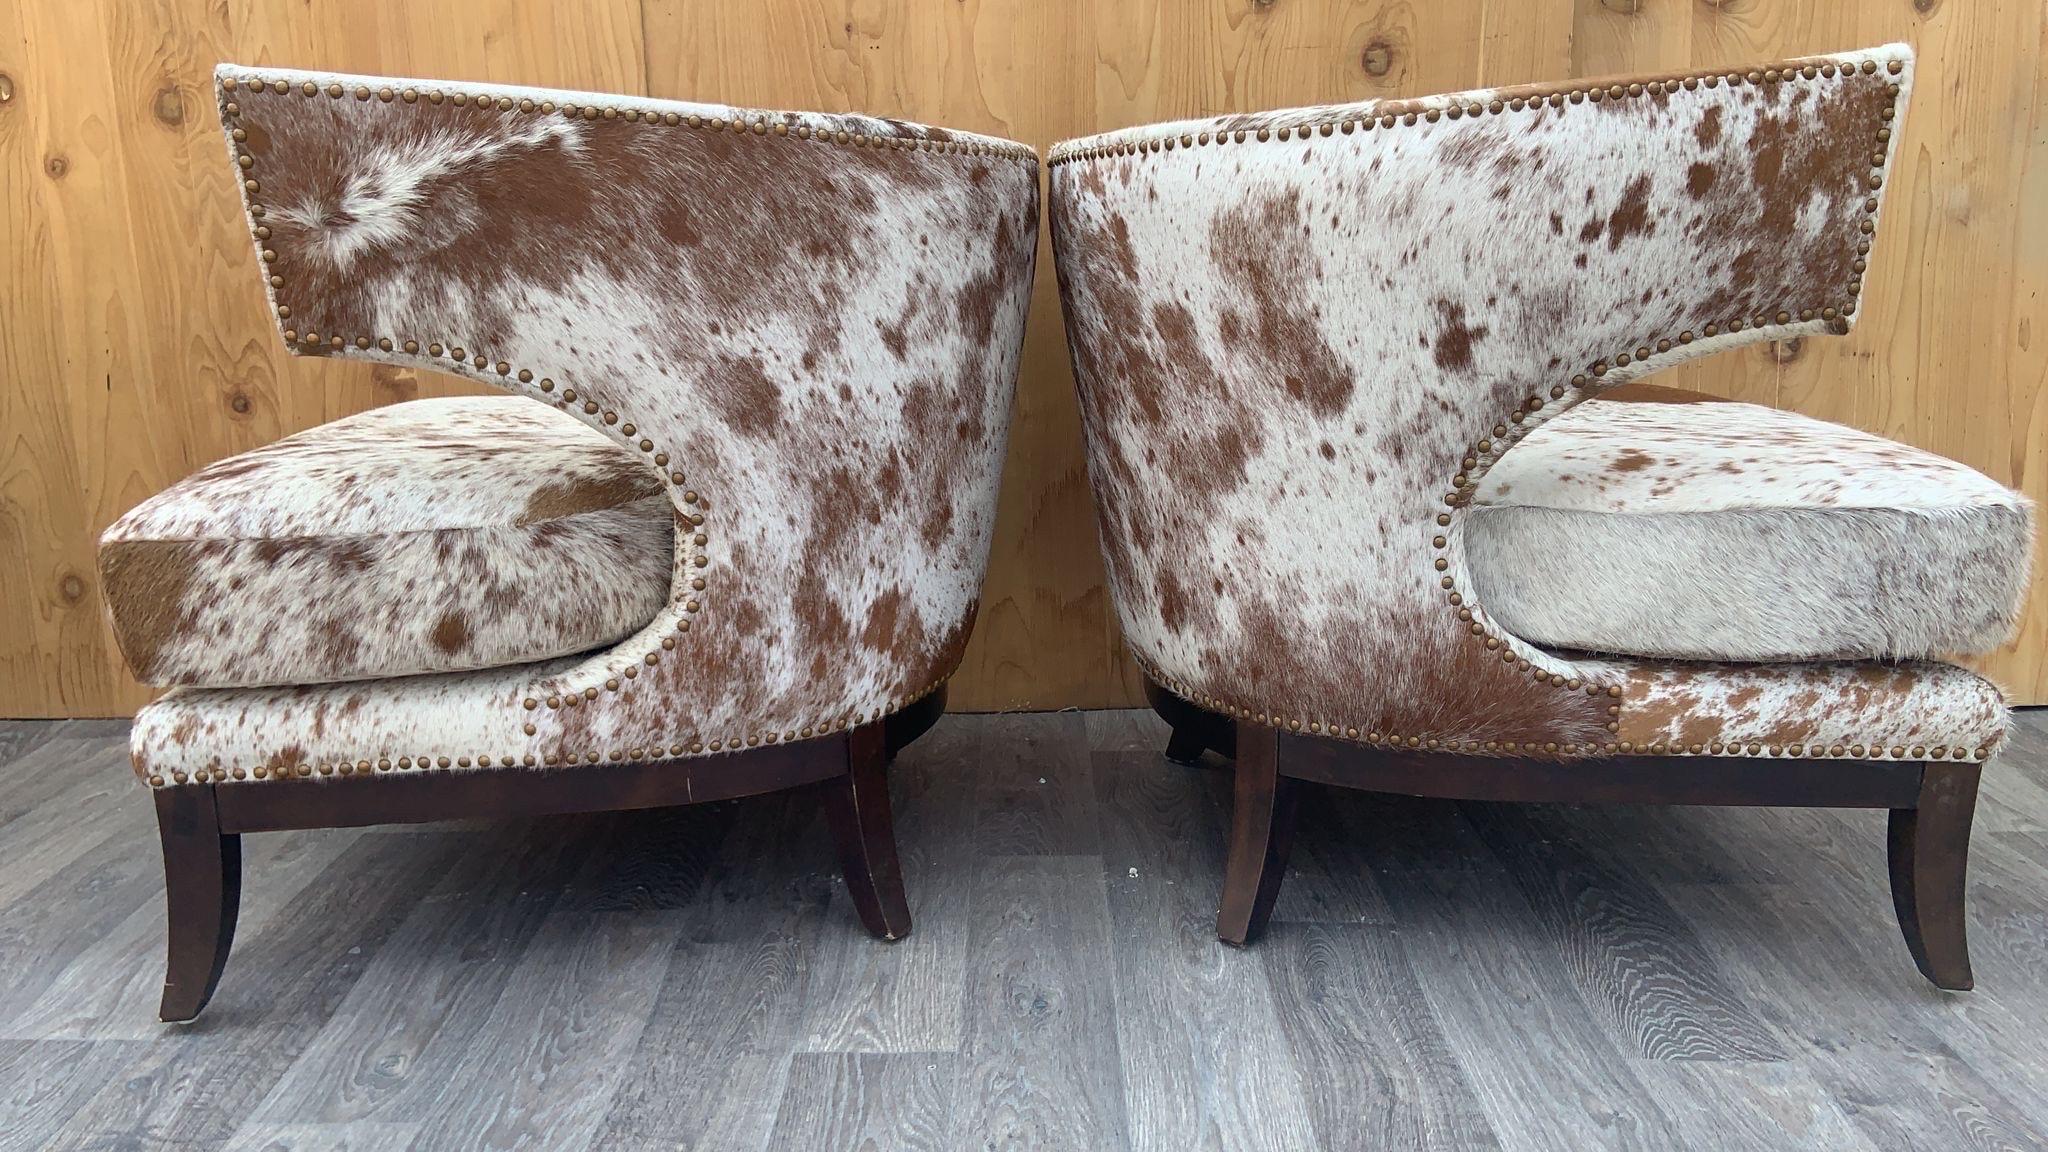 Late 20th Century English Horseshoe Savoy Chairs Newly Upholstered in Brazilian Cowhide - Set of 2